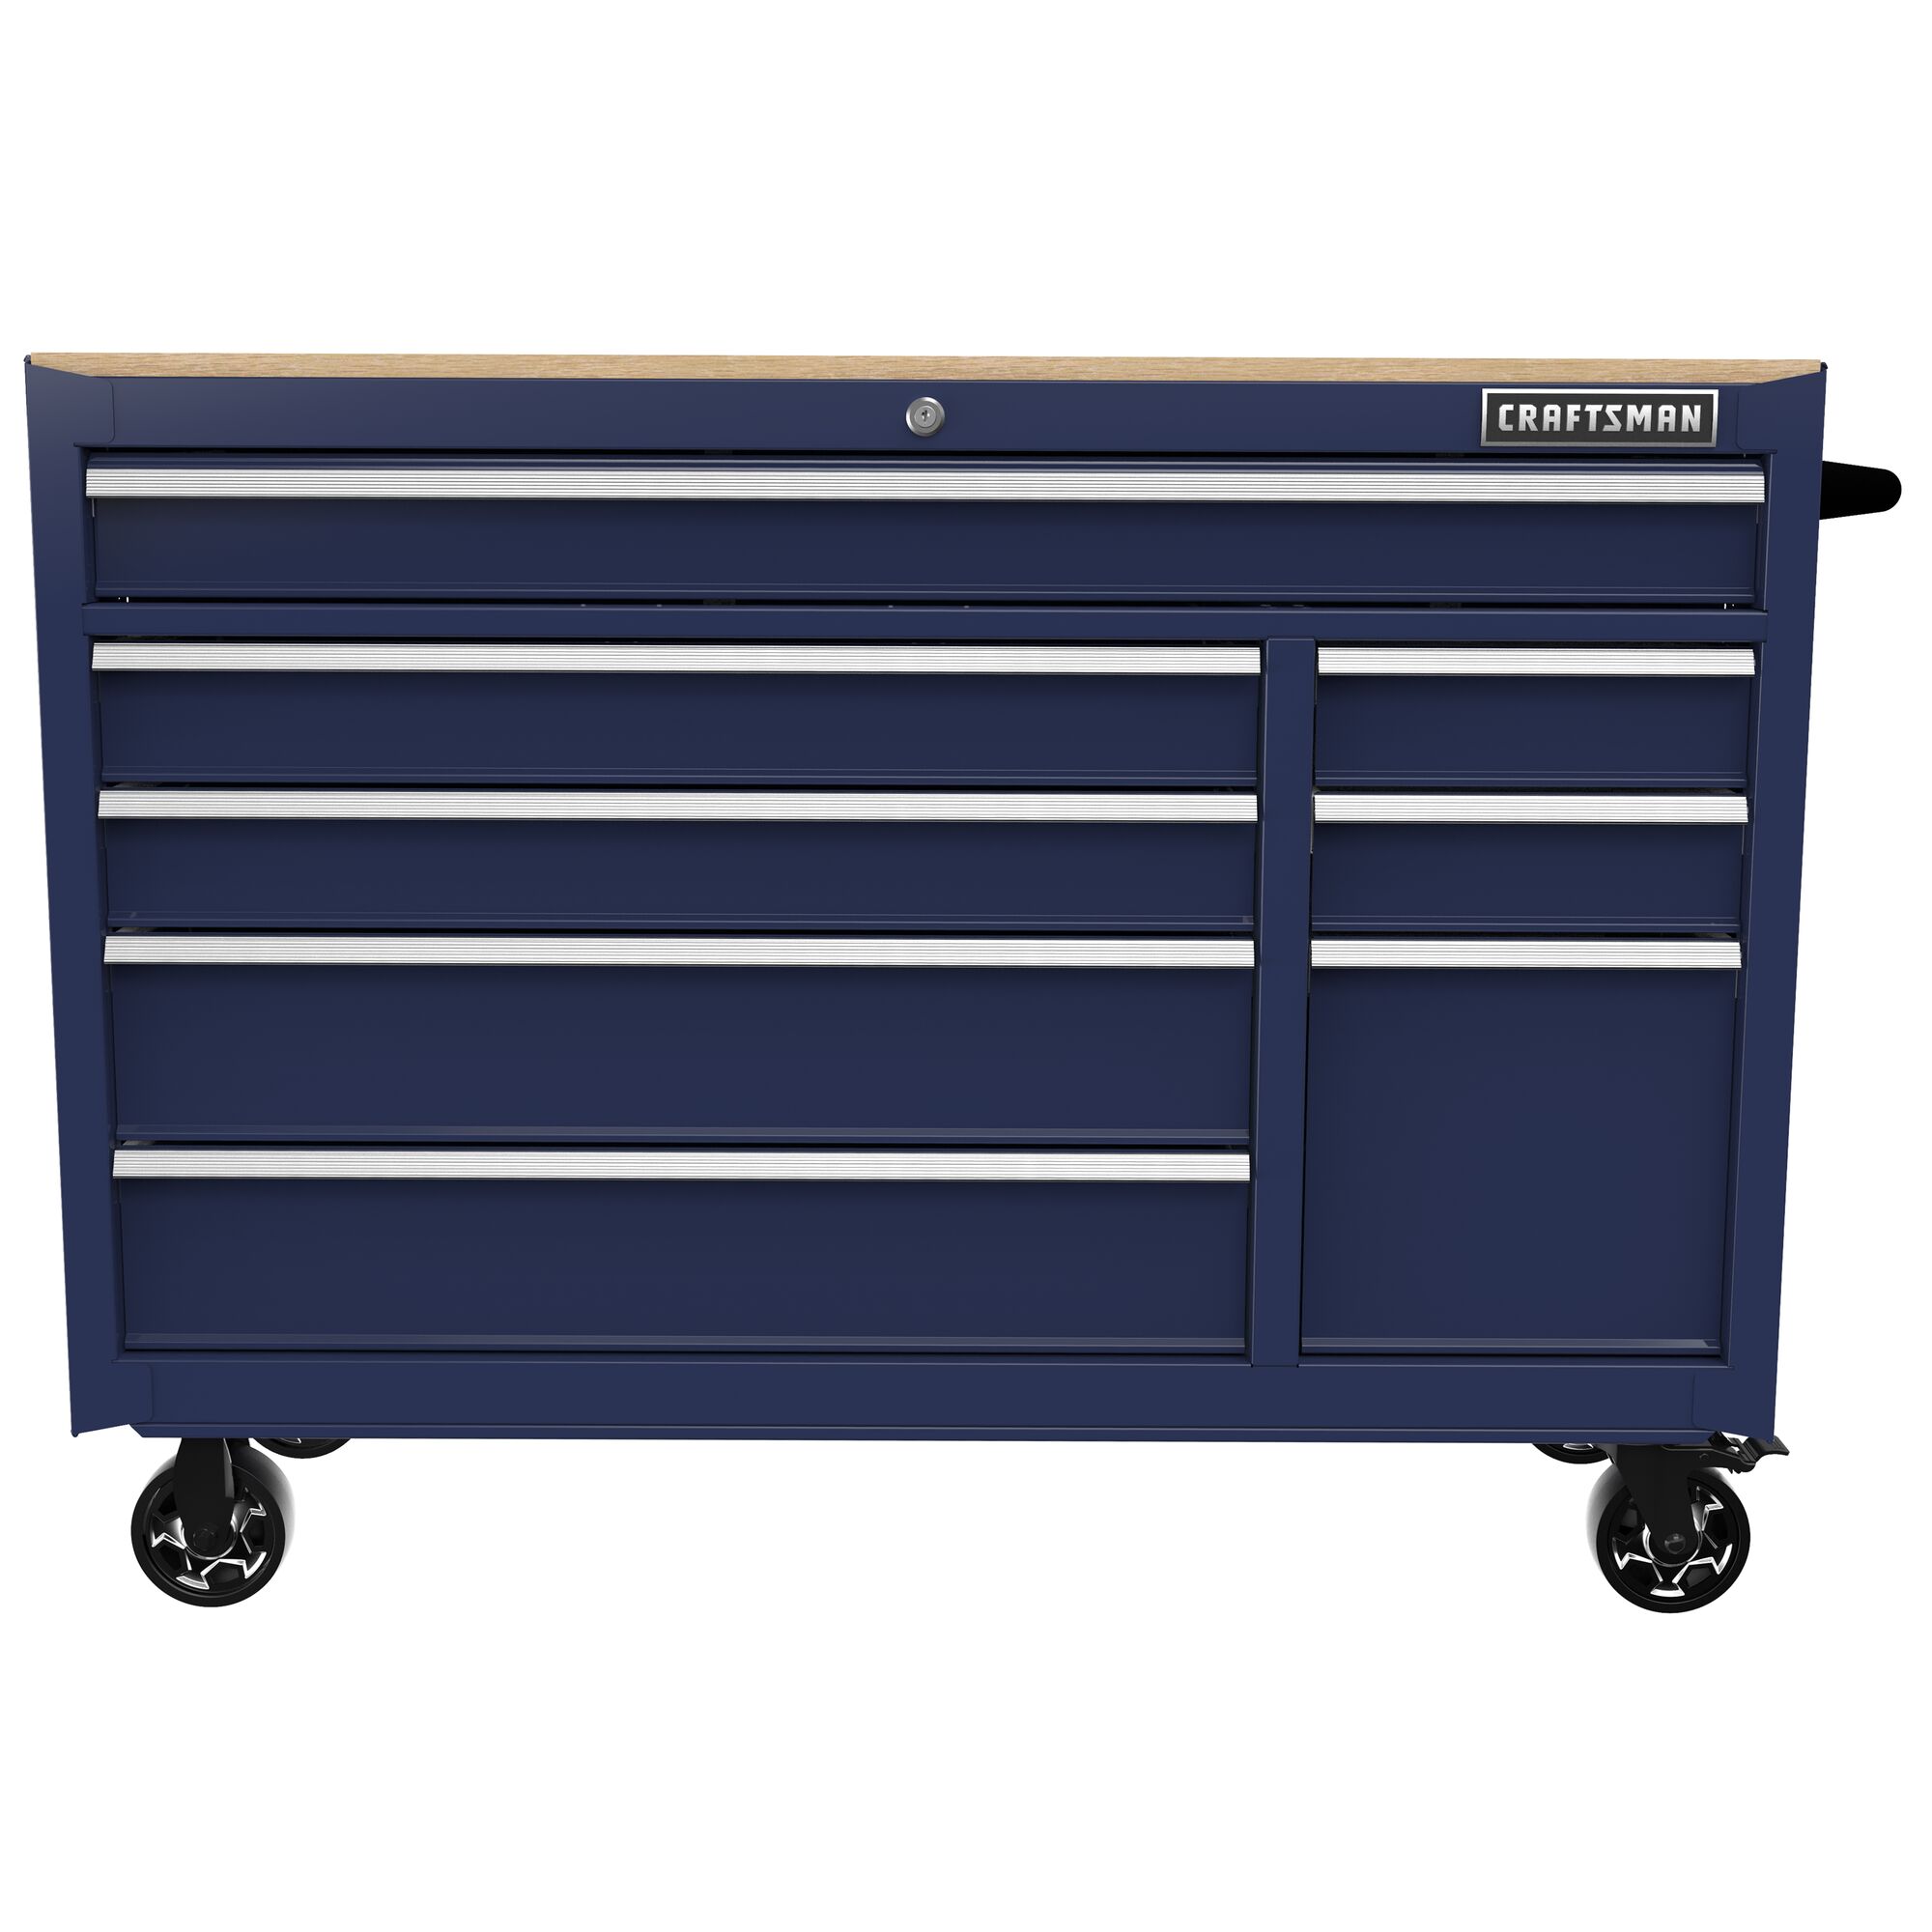 CRAFTSMAN 2000 Series 51.2-in L x 37.5-in H 8-Drawers Rolling Midnight Blue  Wood Work Bench